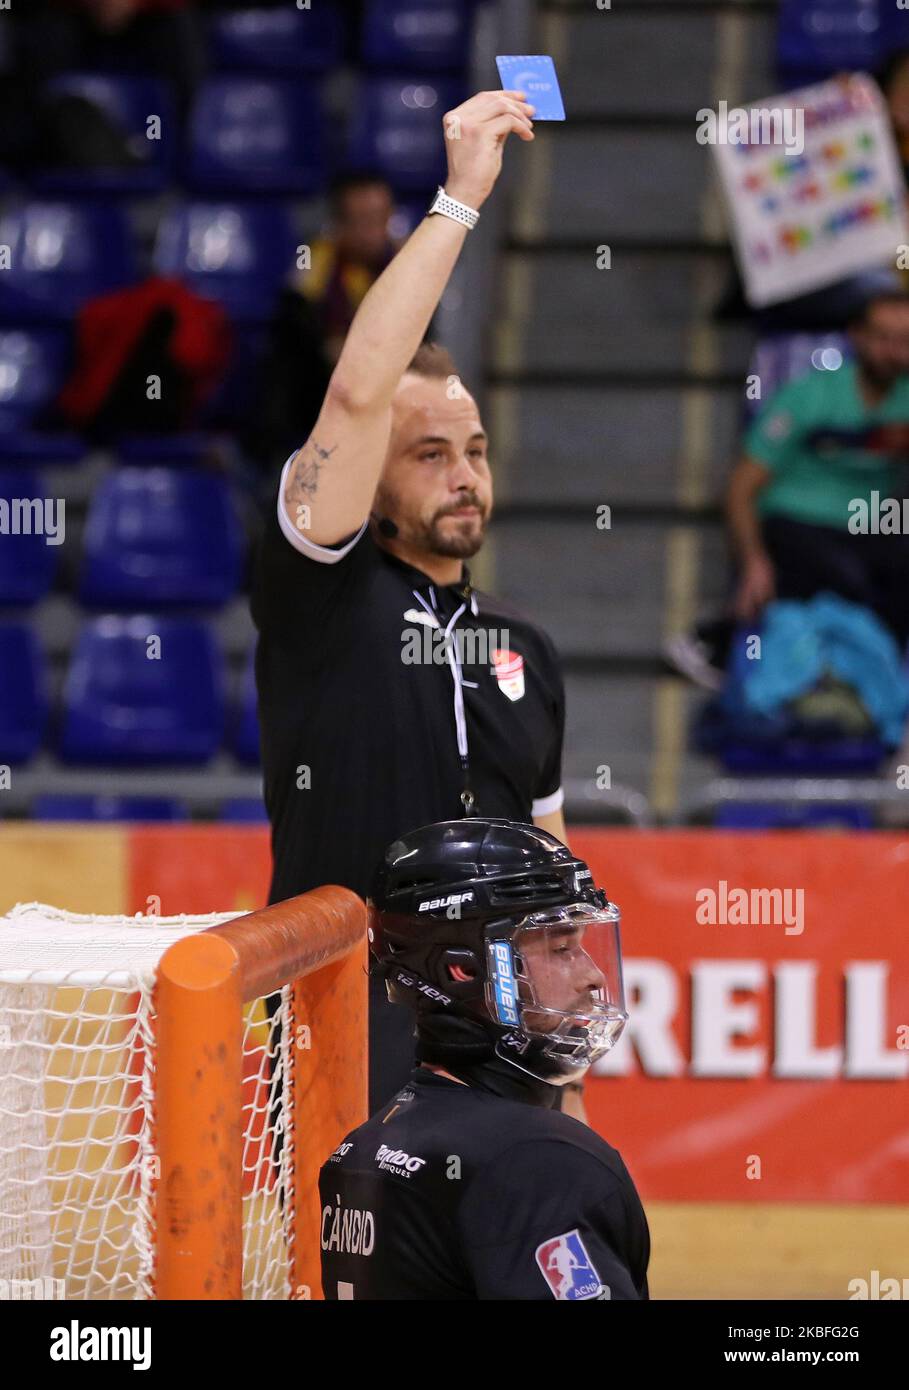 Blue card during the match between FC Barcelona and Reus Deportiu,  corresponding to the week 17 of the spanish roller hockey OK Liga, played at  the Palau Blaugrana, on 26th January 2020,